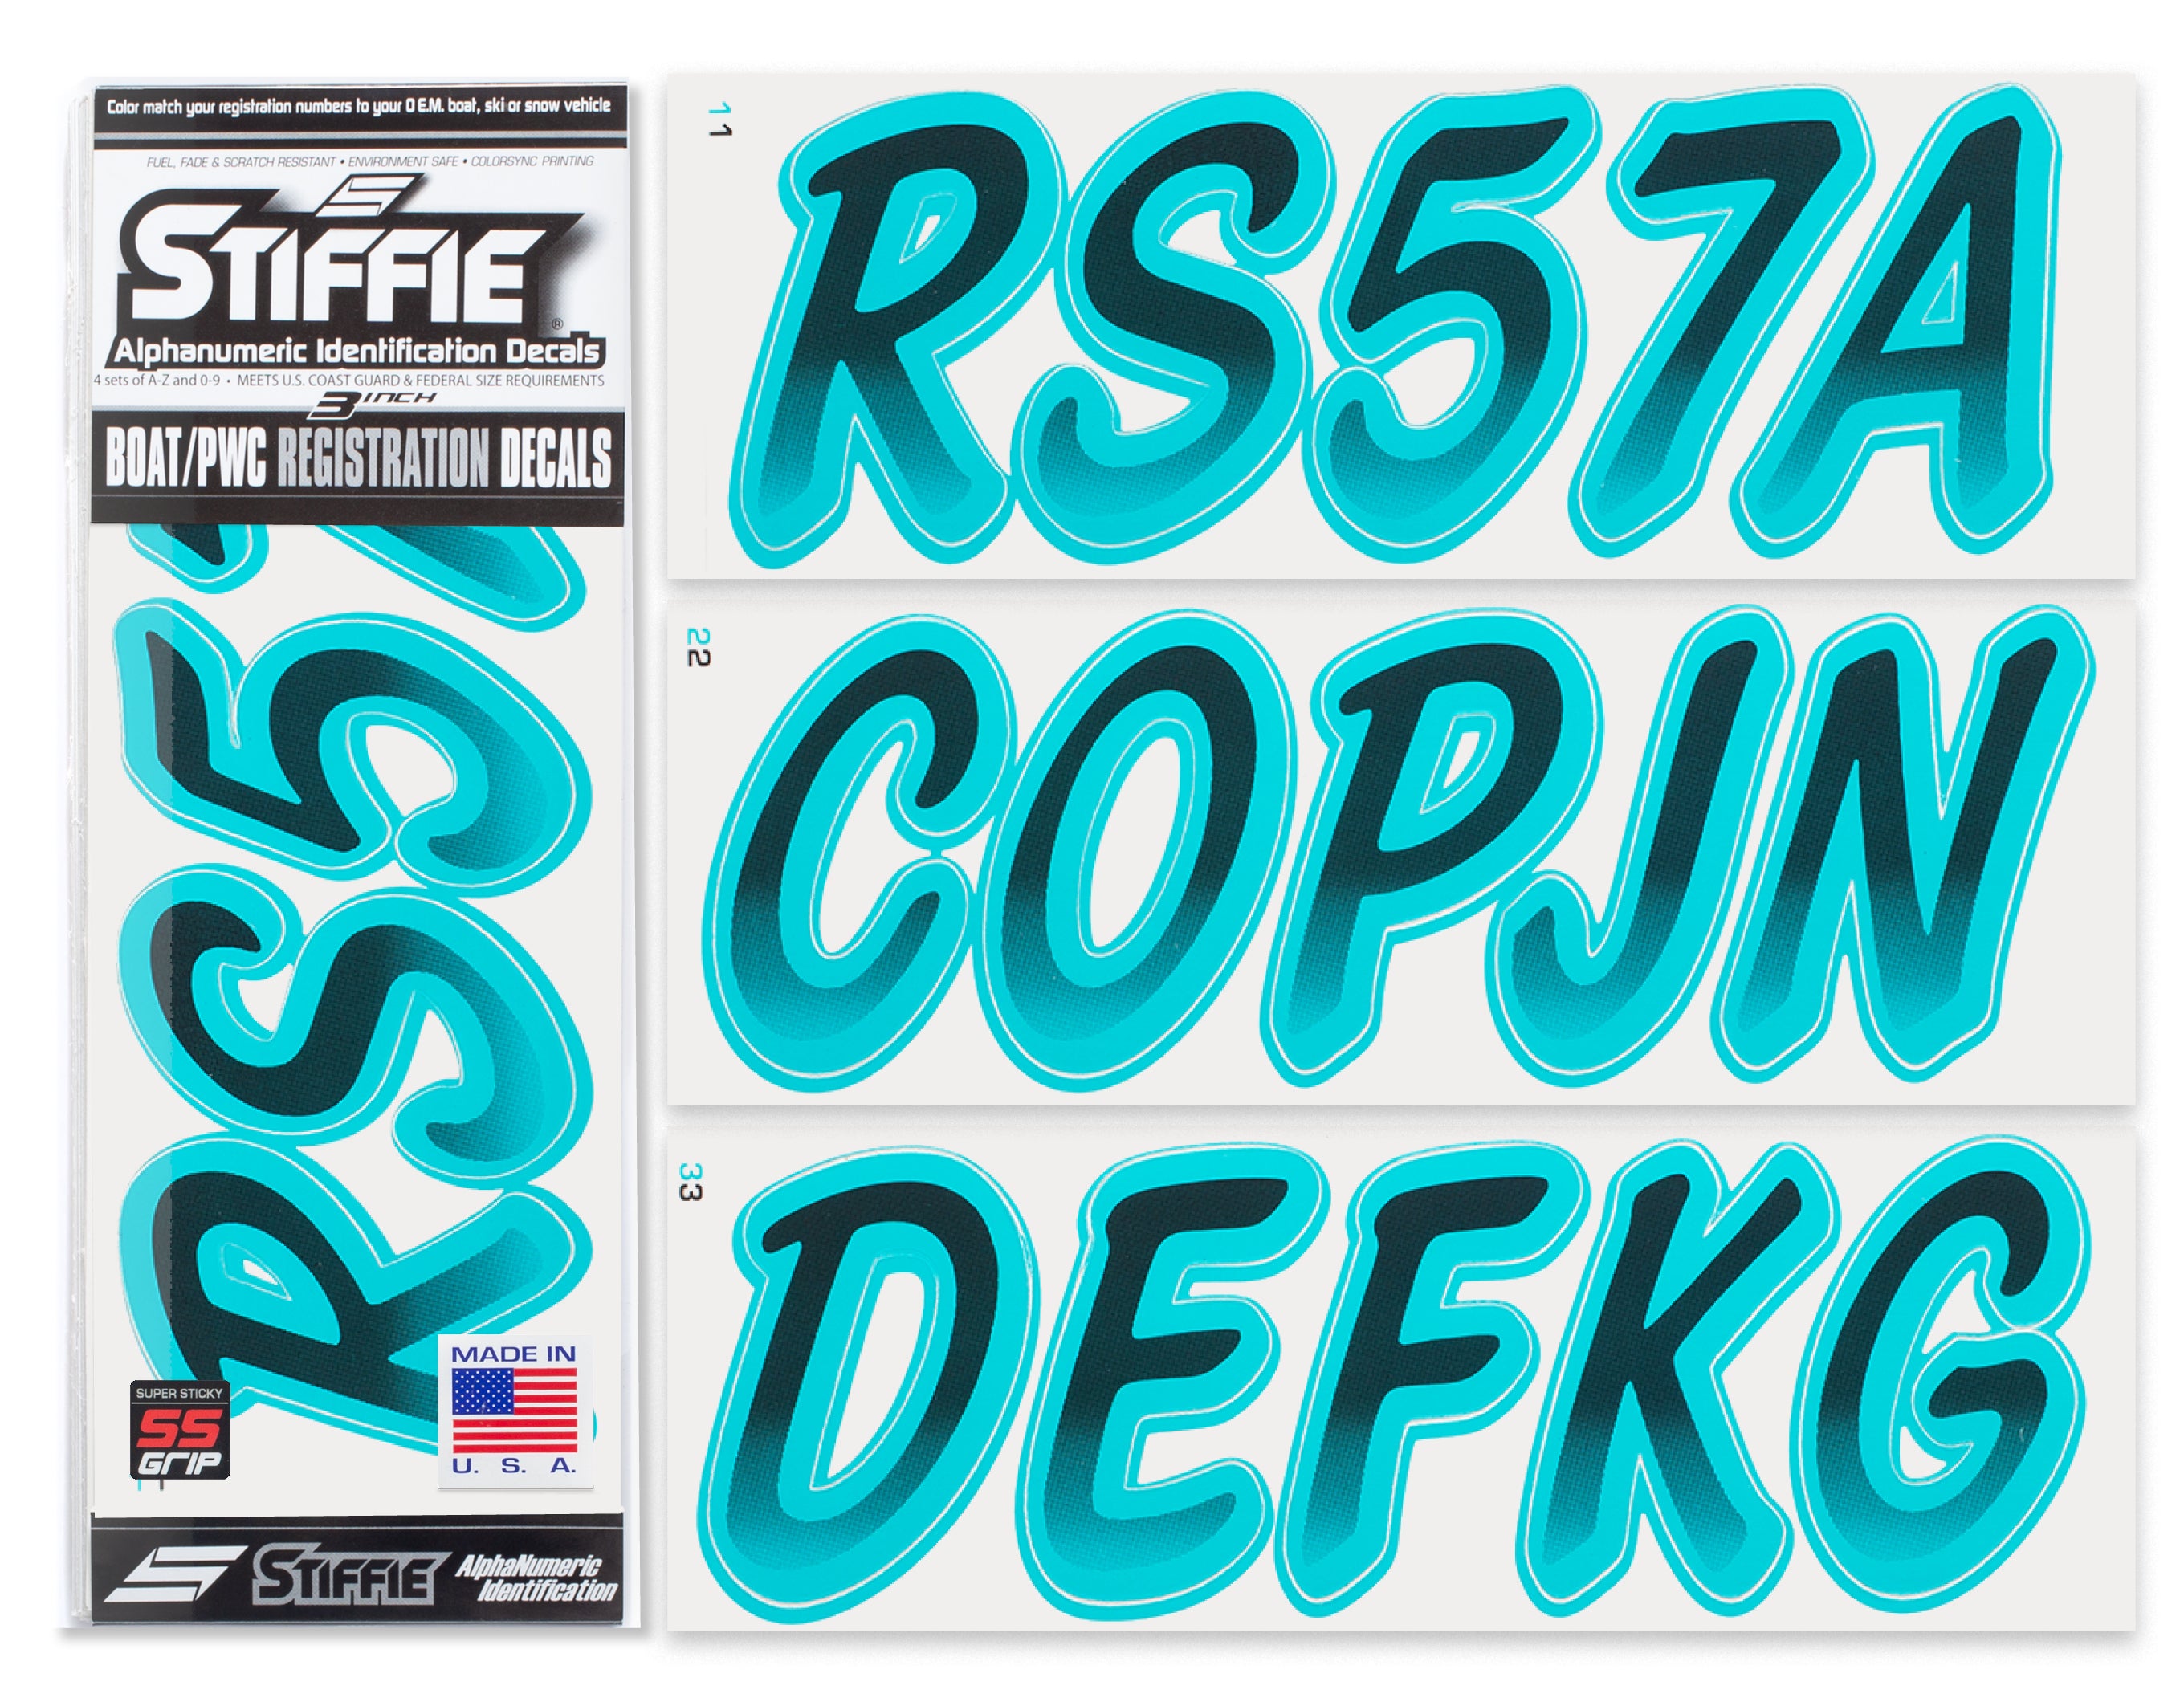 Stiffie Whipline Black/Candy Blue Super Sticky 3" Alpha Numeric Registration Identification Numbers Stickers Decals for Sea-Doo Spark, Inflatable Boats, Ribs, Hypalon/PVC, PWC and Boats